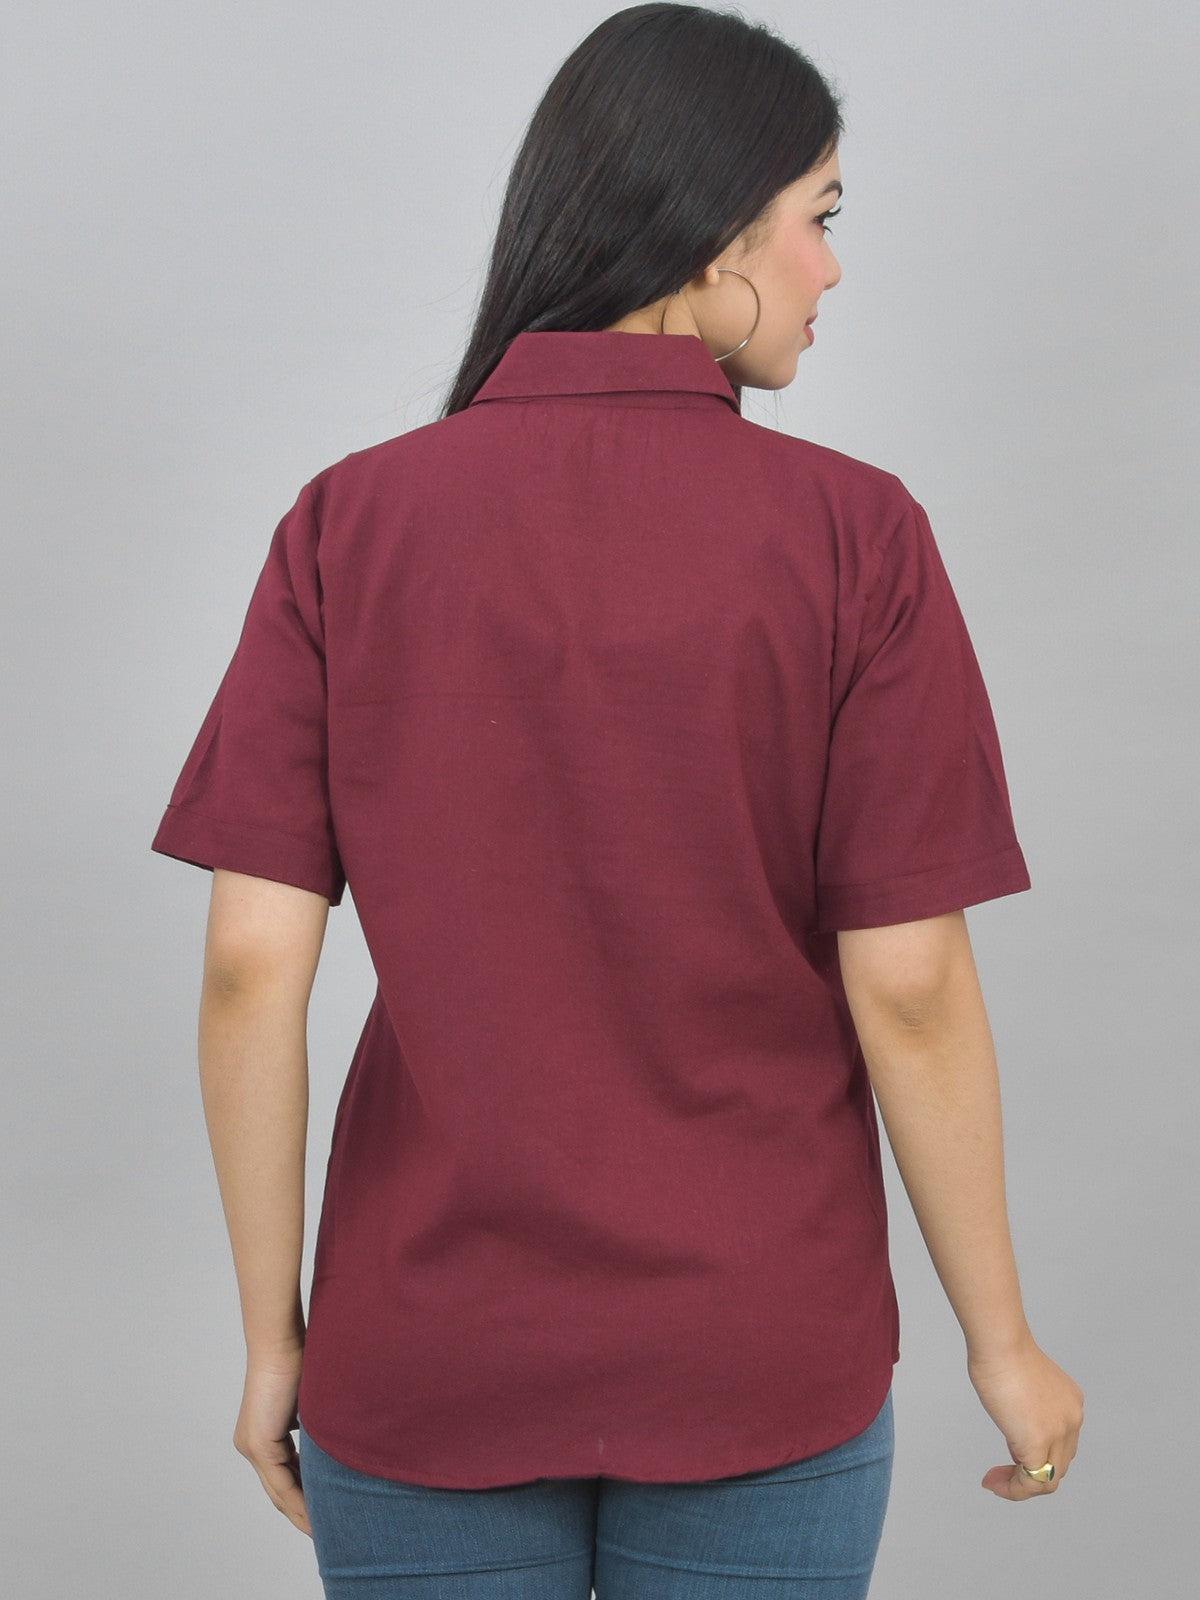 Pack Of 2 Womens Solid Grey And Wine Half Sleeve Cotton Shirts Combo